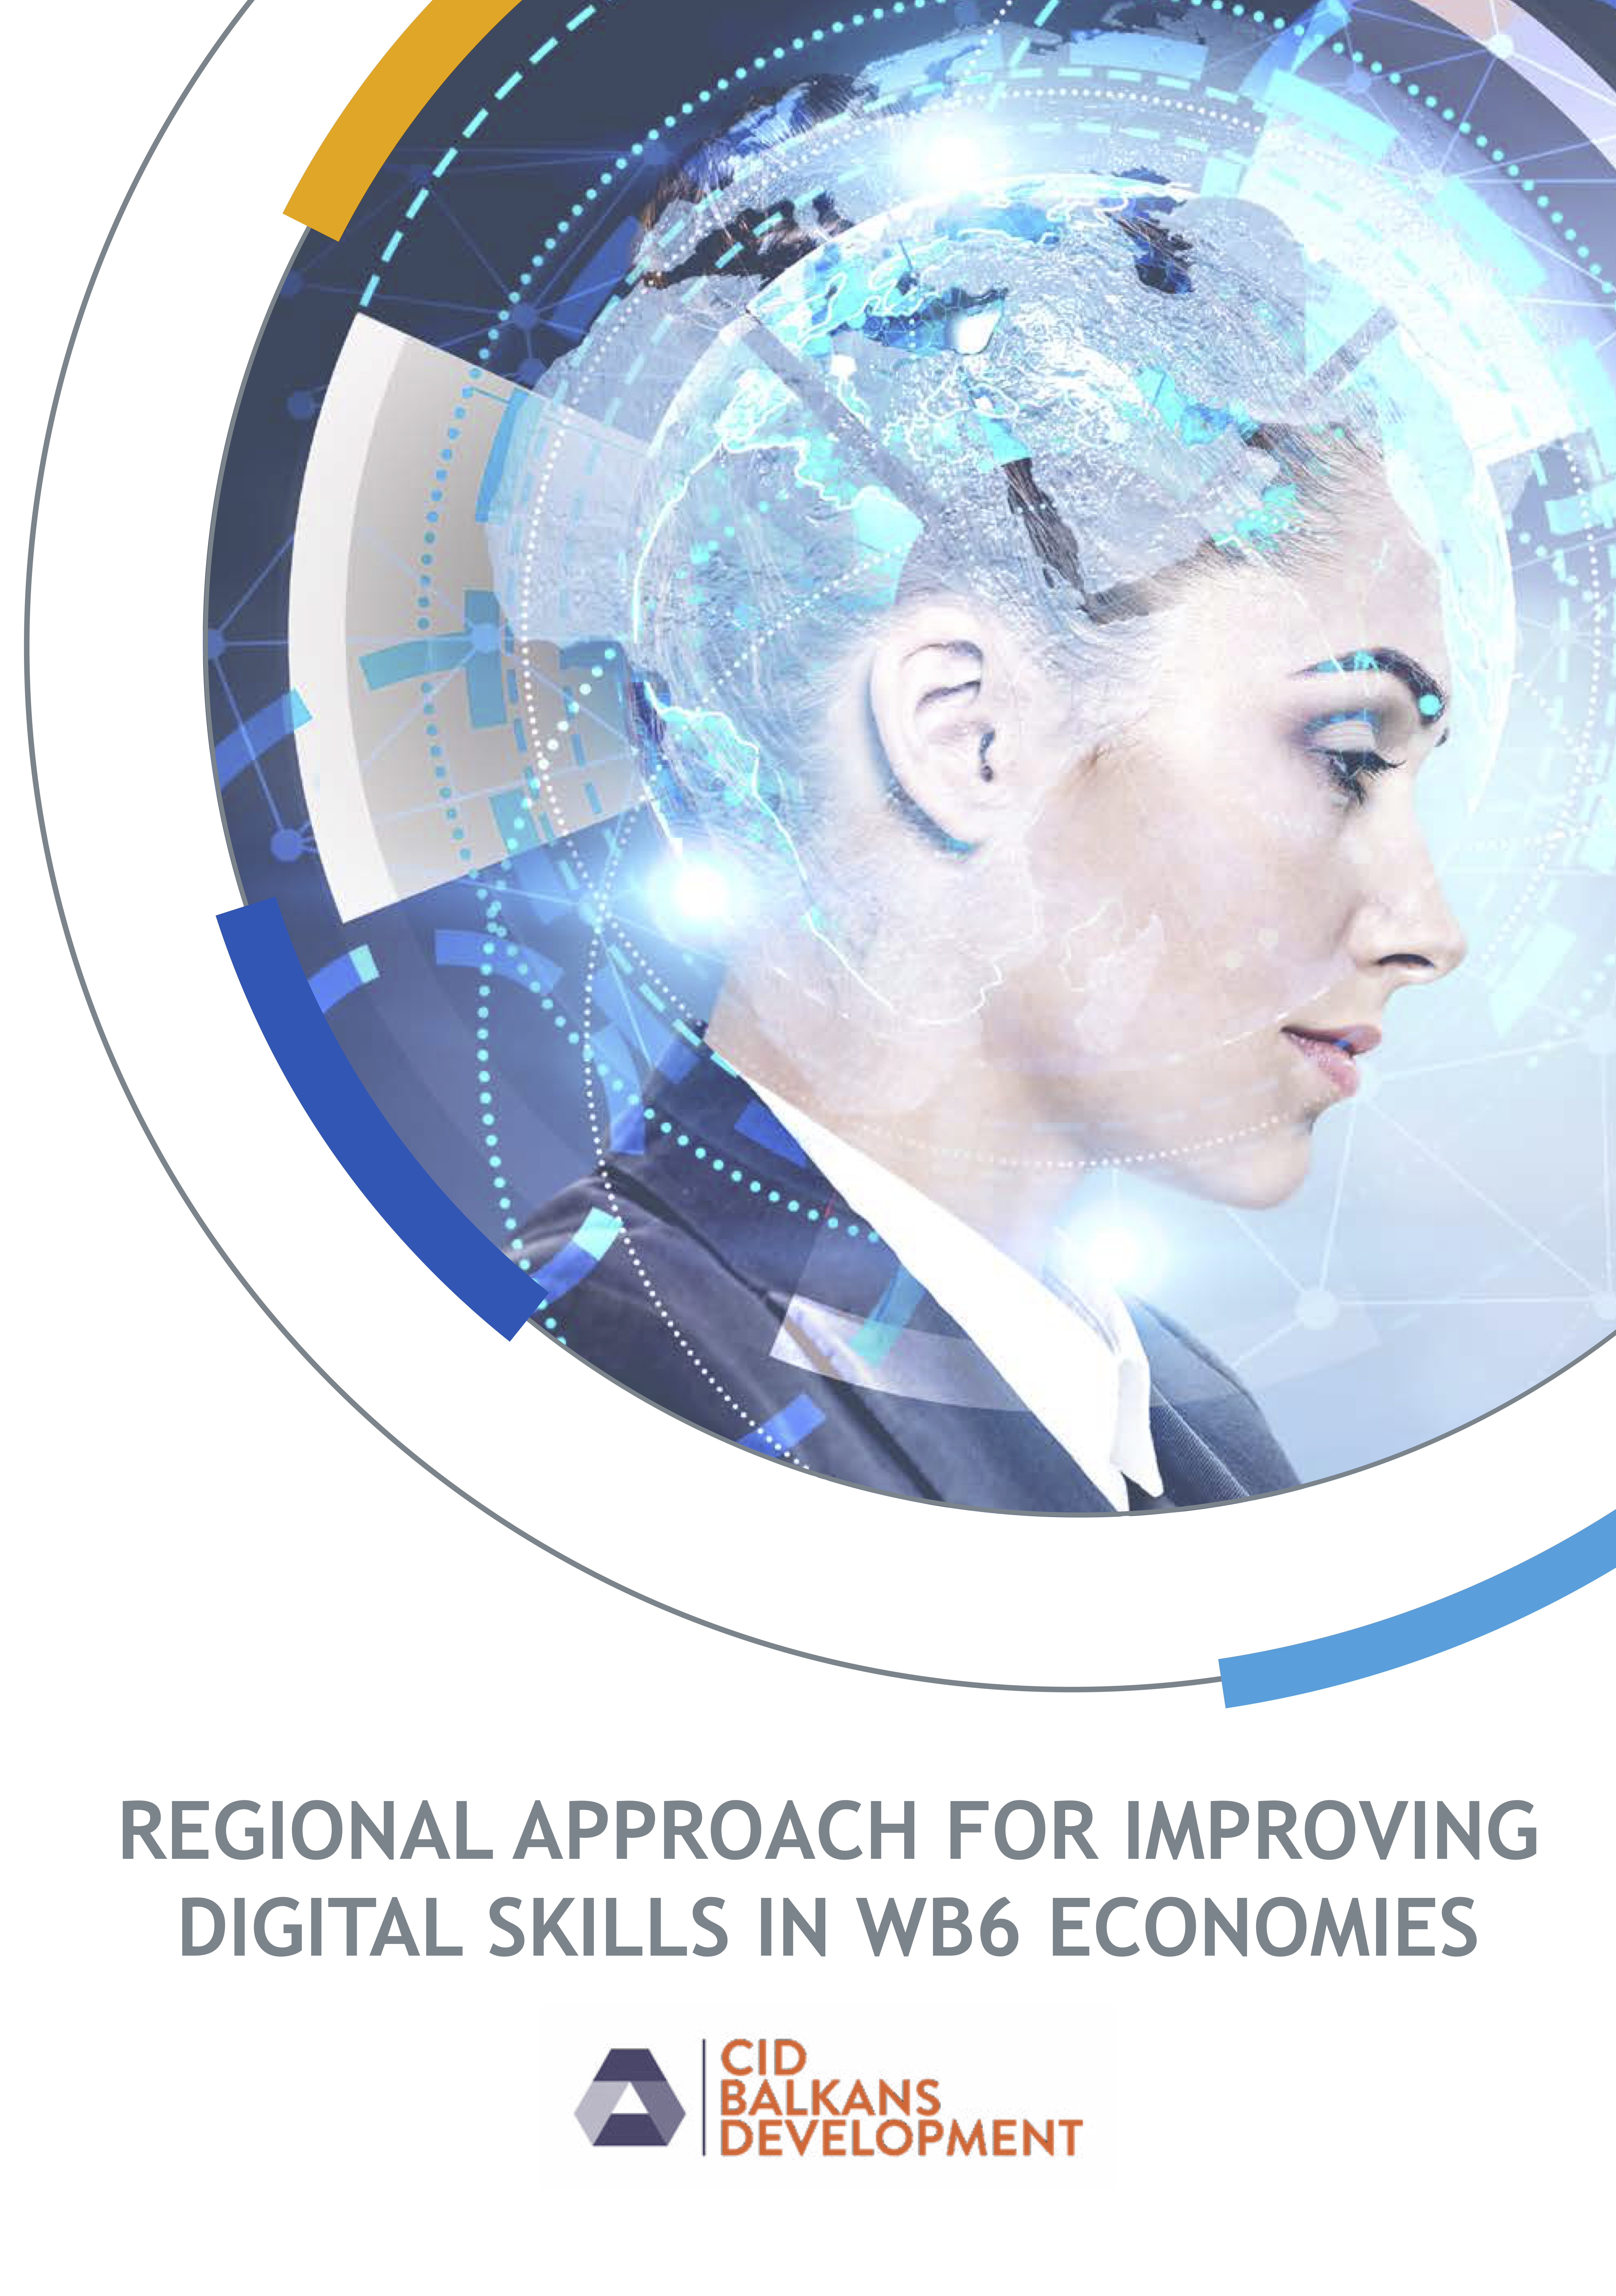 Report "Regional Approach for Improving Digital Skills in WB6 Economies"